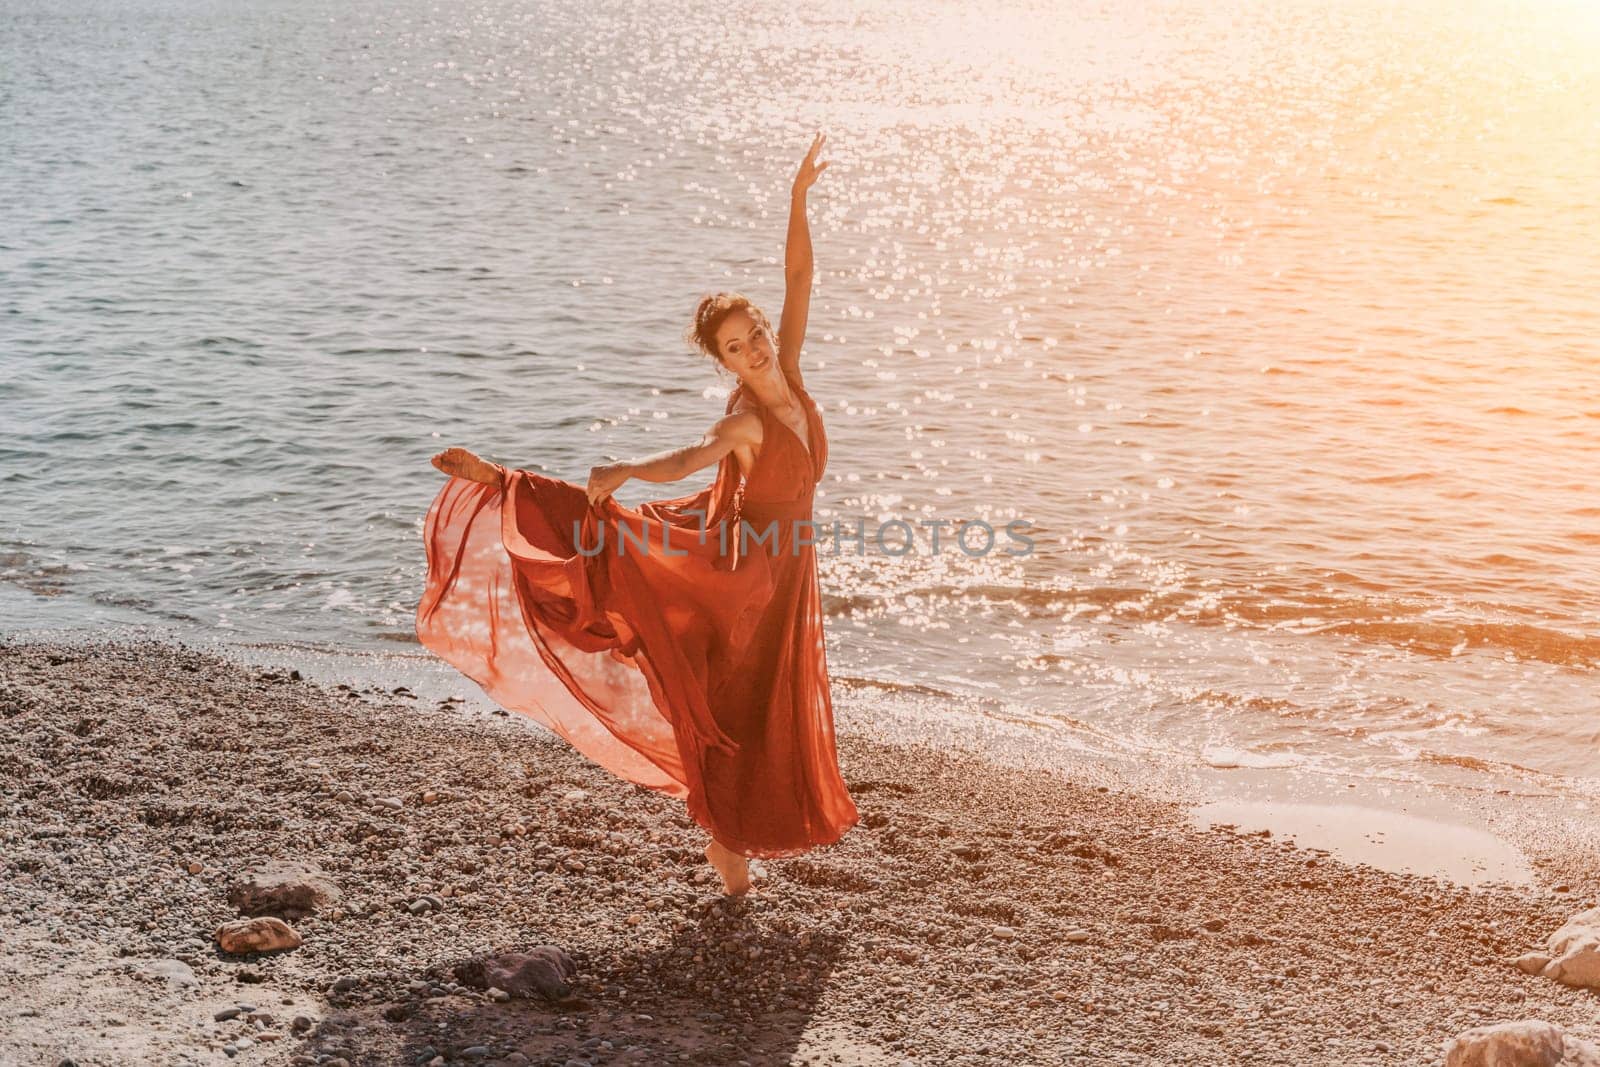 Woman red dress sea. Female dancer in a long red dress posing on a beach with rocks on sunny day. Girl on the nature on blue sky background